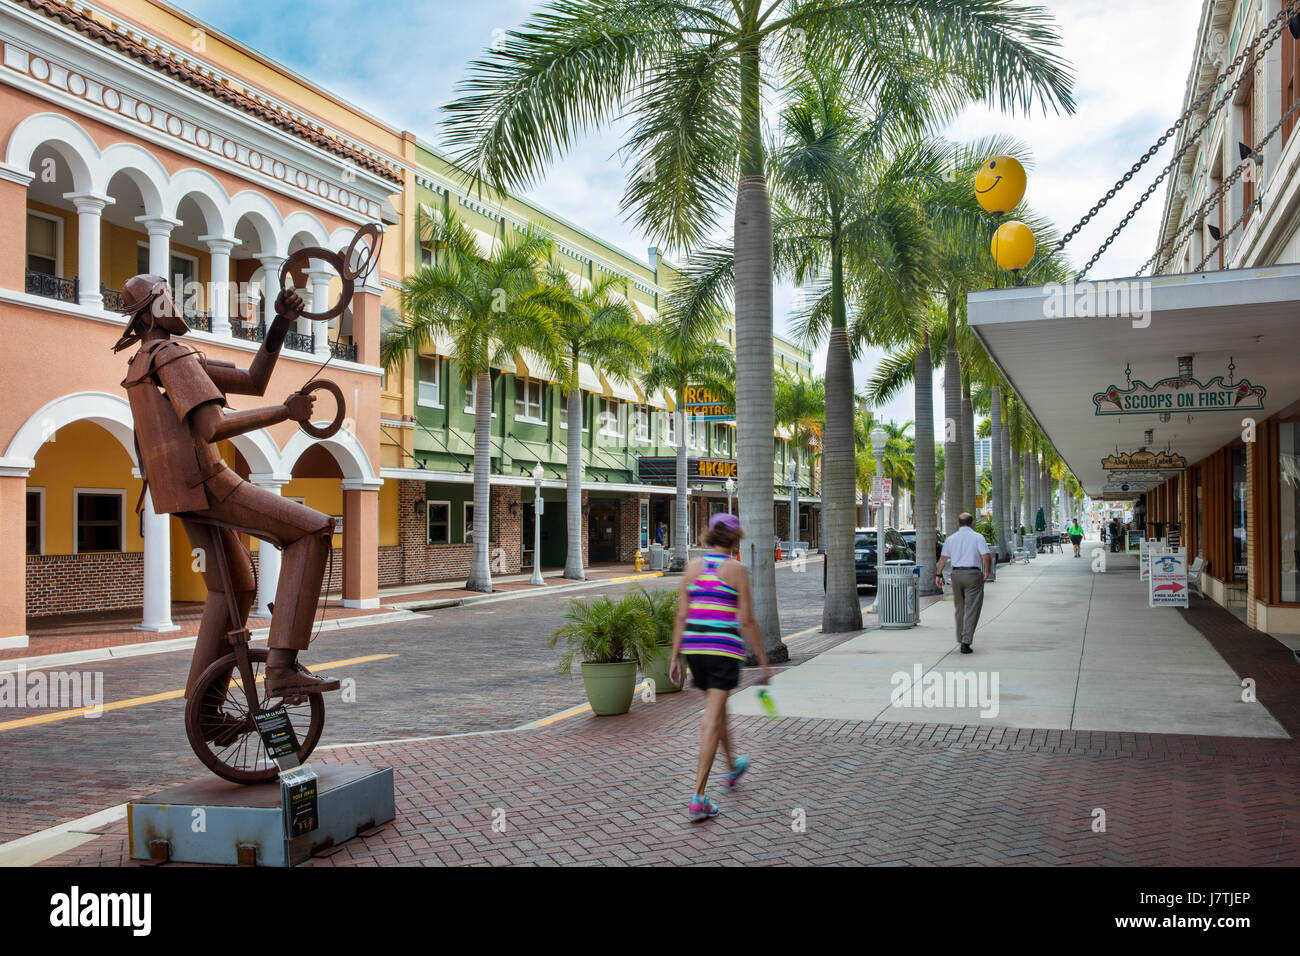 Juggler on a Unicycle - a metal sculpture by Edgardo Carmona on a sidwalk display on First Street, Fort Myers, Florida, USA Stock Photo